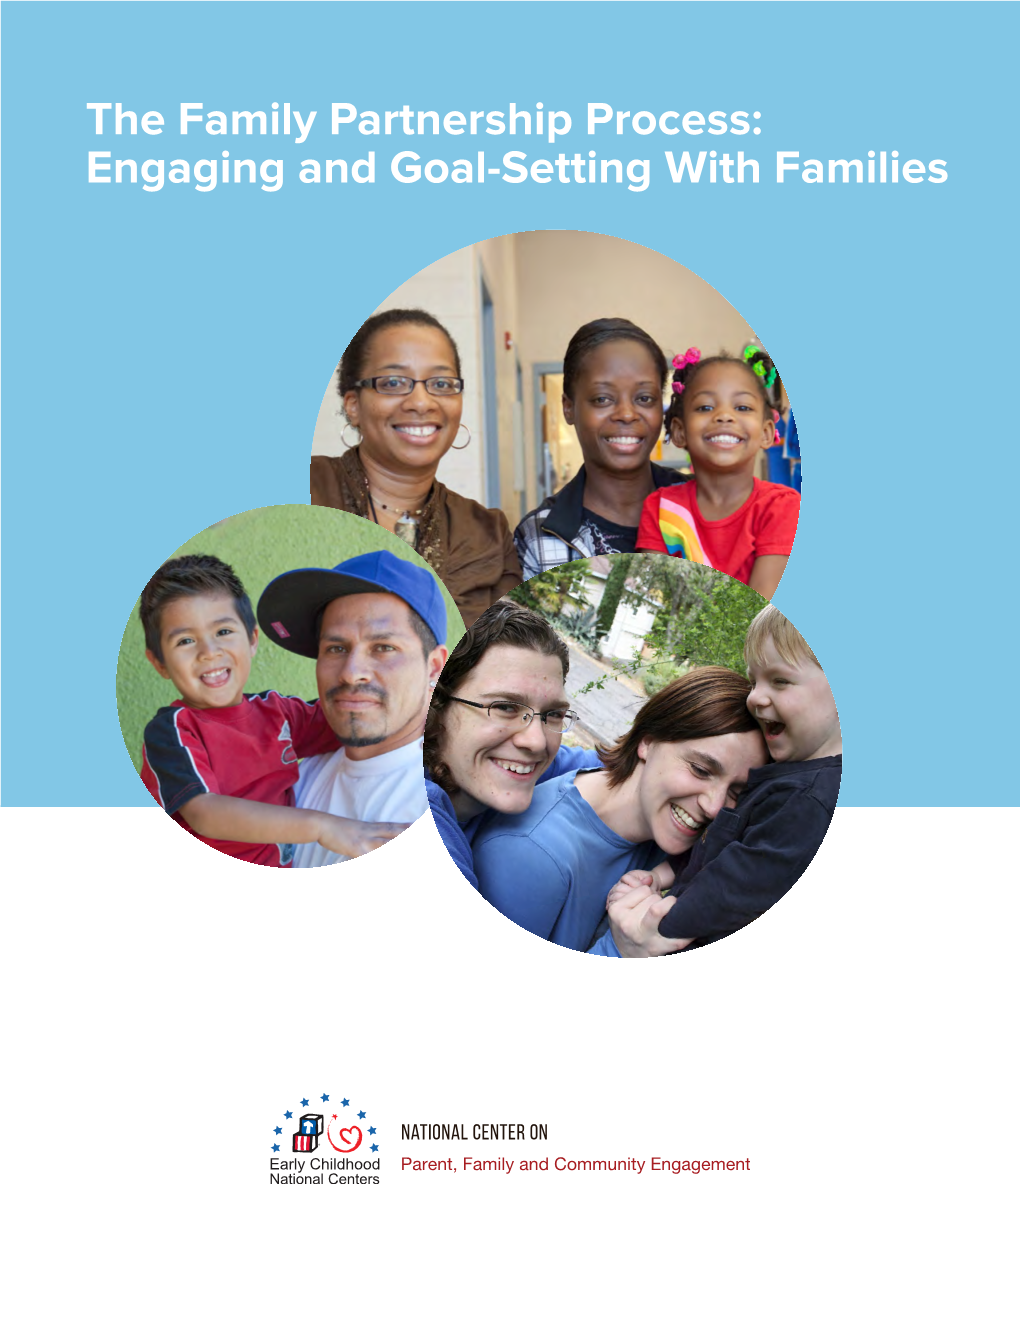 Engaging and Goal-Setting with Families